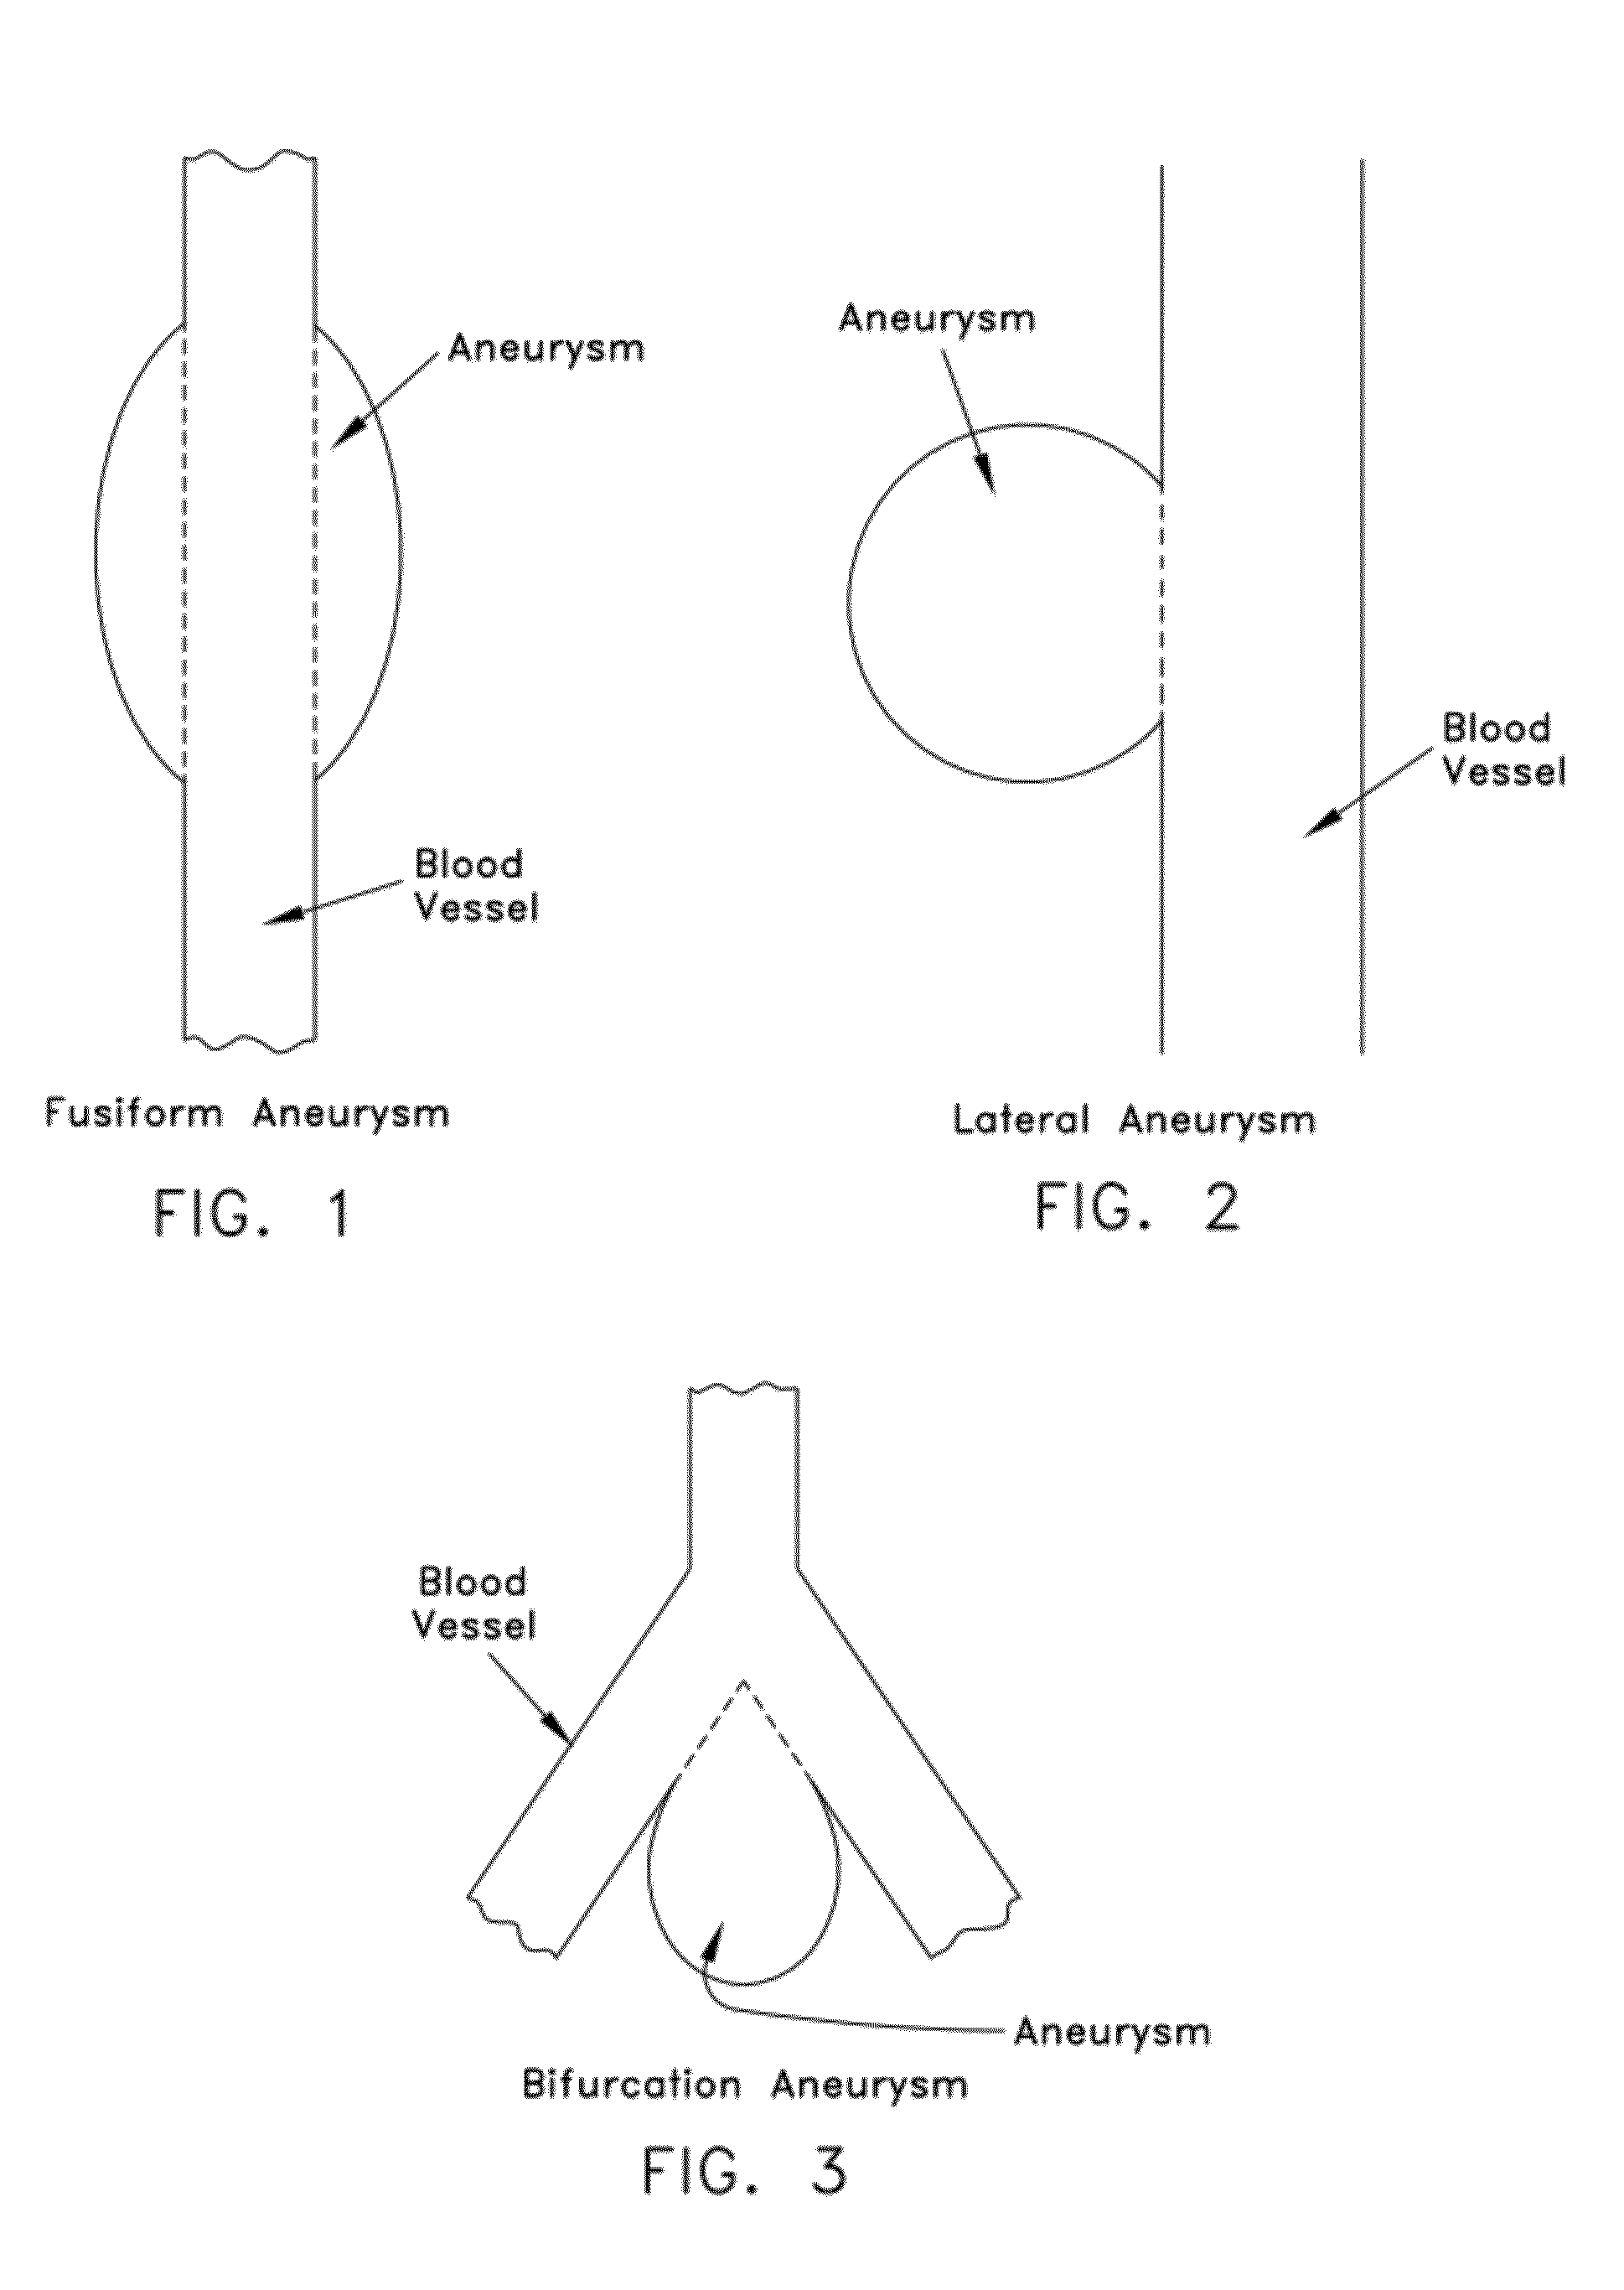 Method and apparatus for restricting flow through an opening in the side wall of a body lumen, and/or for reinforcing a weakness in the side wall of a body lumen, while still maintaining substantially normal flow through the body lumen